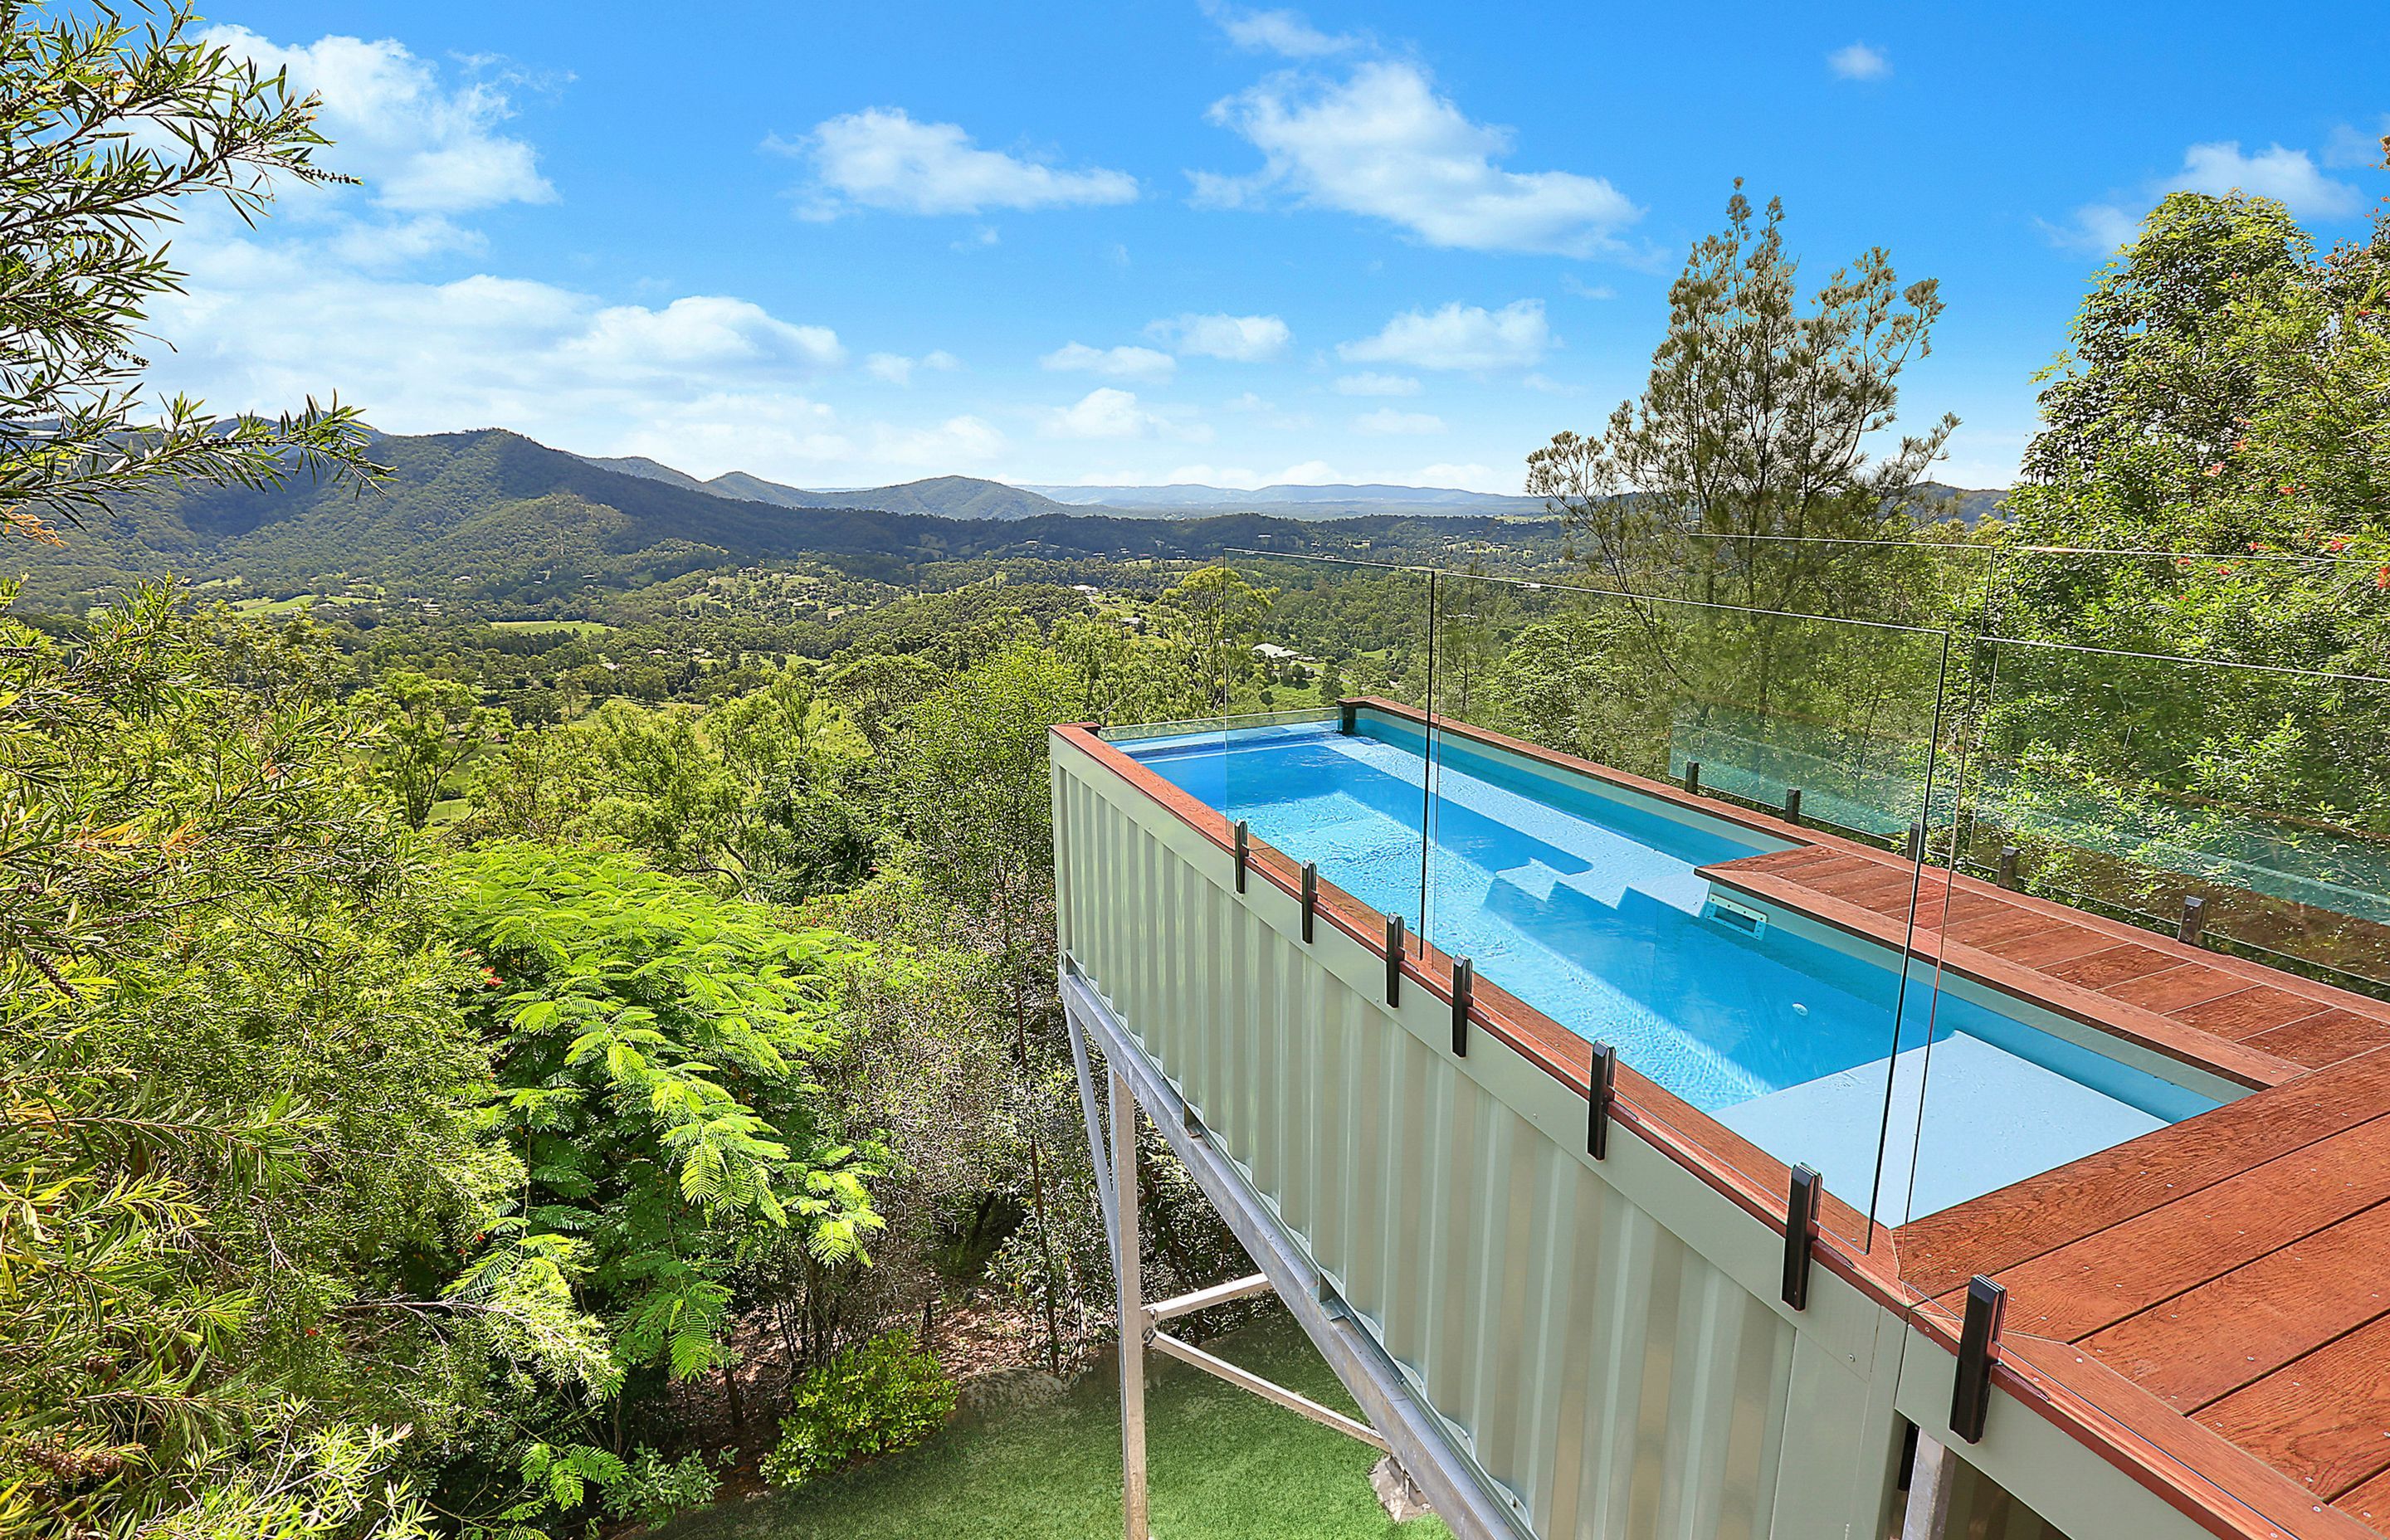 Brisbane Hills. Product by Shipping Container Pools | Photography by Aiden Lefman